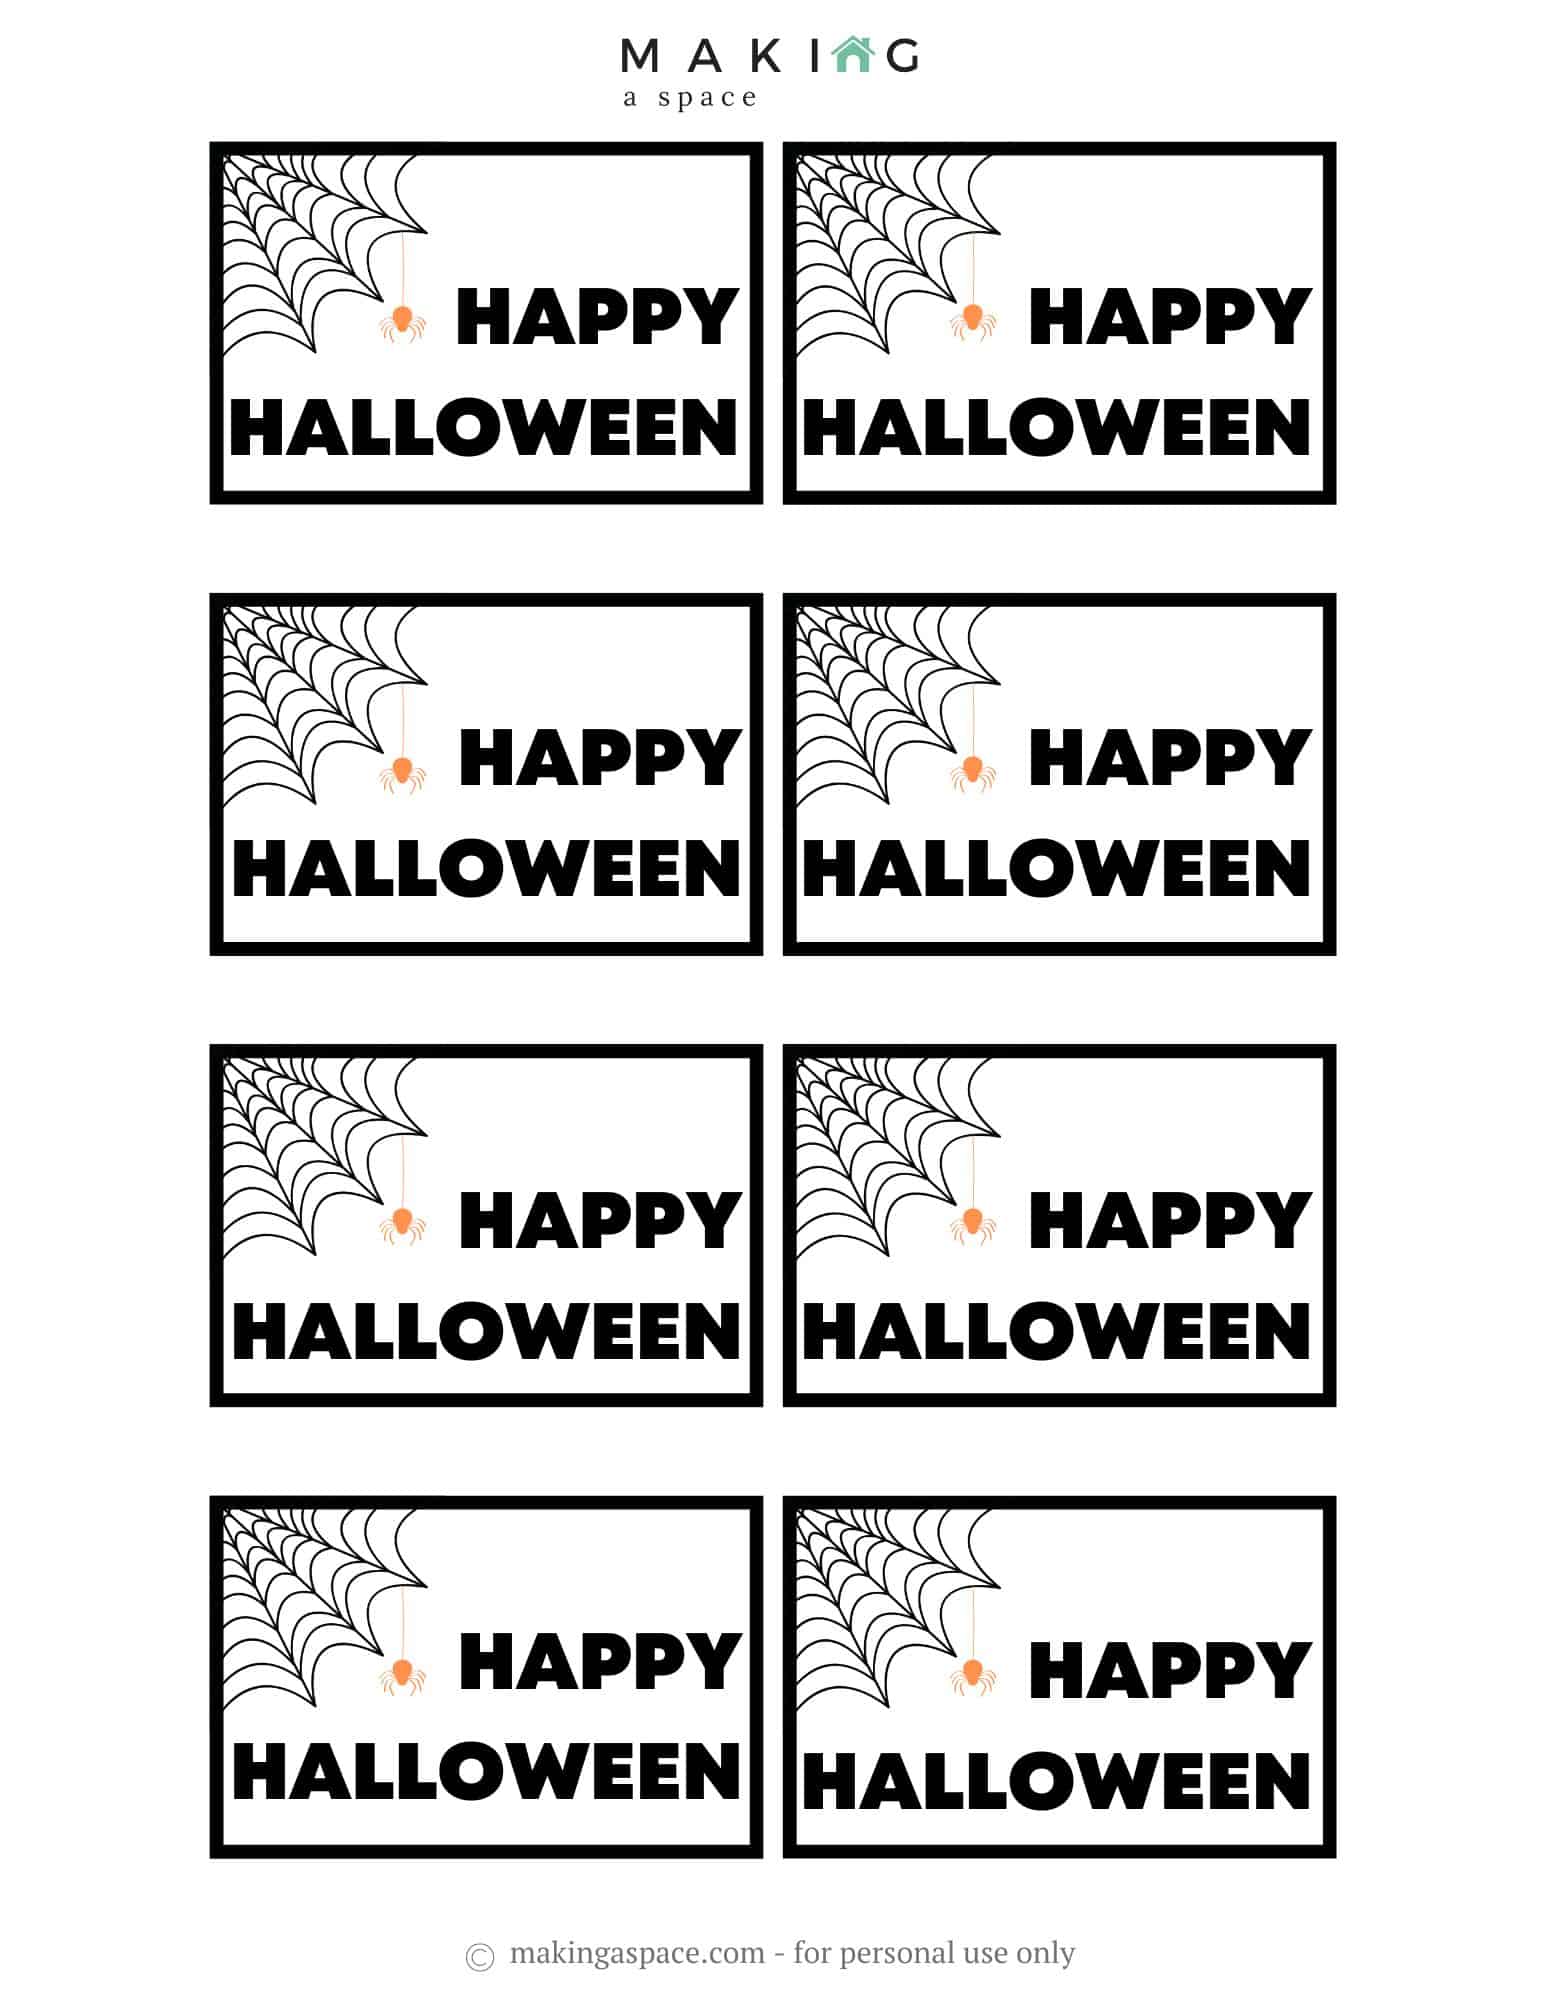 free-printable-halloween-gift-tags-making-a-space